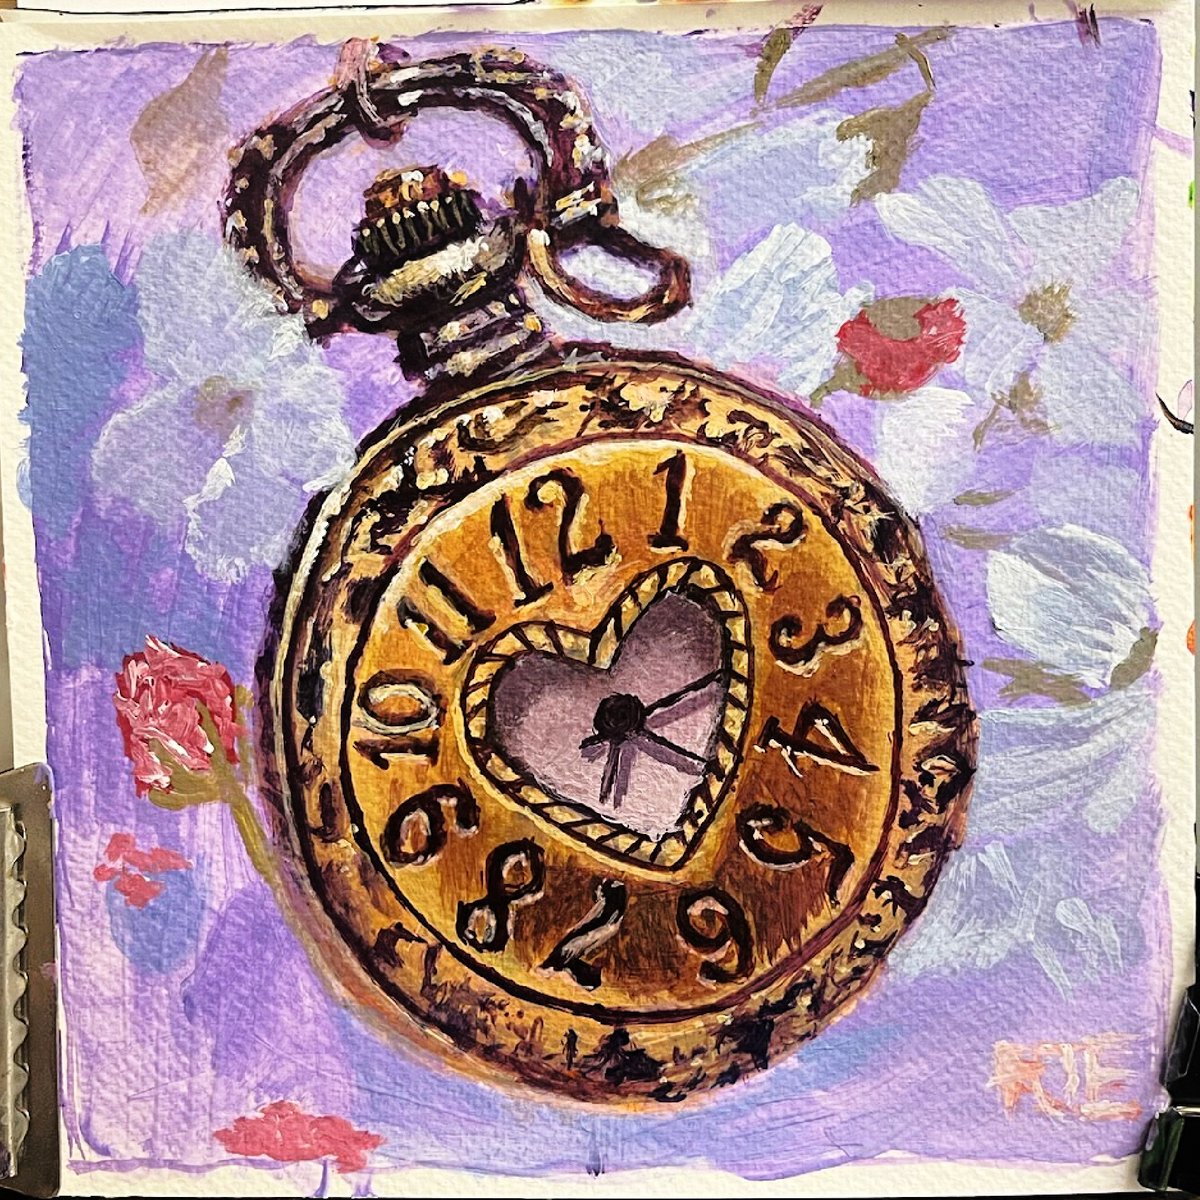 'Brass watch and cherry blossoms'
8x8 inches Acrylic on paper
#pocketwatch #watch #cherryblossoms #stilllife #painting #acrylicpainting #liquitexpaint #basicsacrylicpaint #watercolor #paper #fabrianopaper #princetonbrush #rosemarybrushes